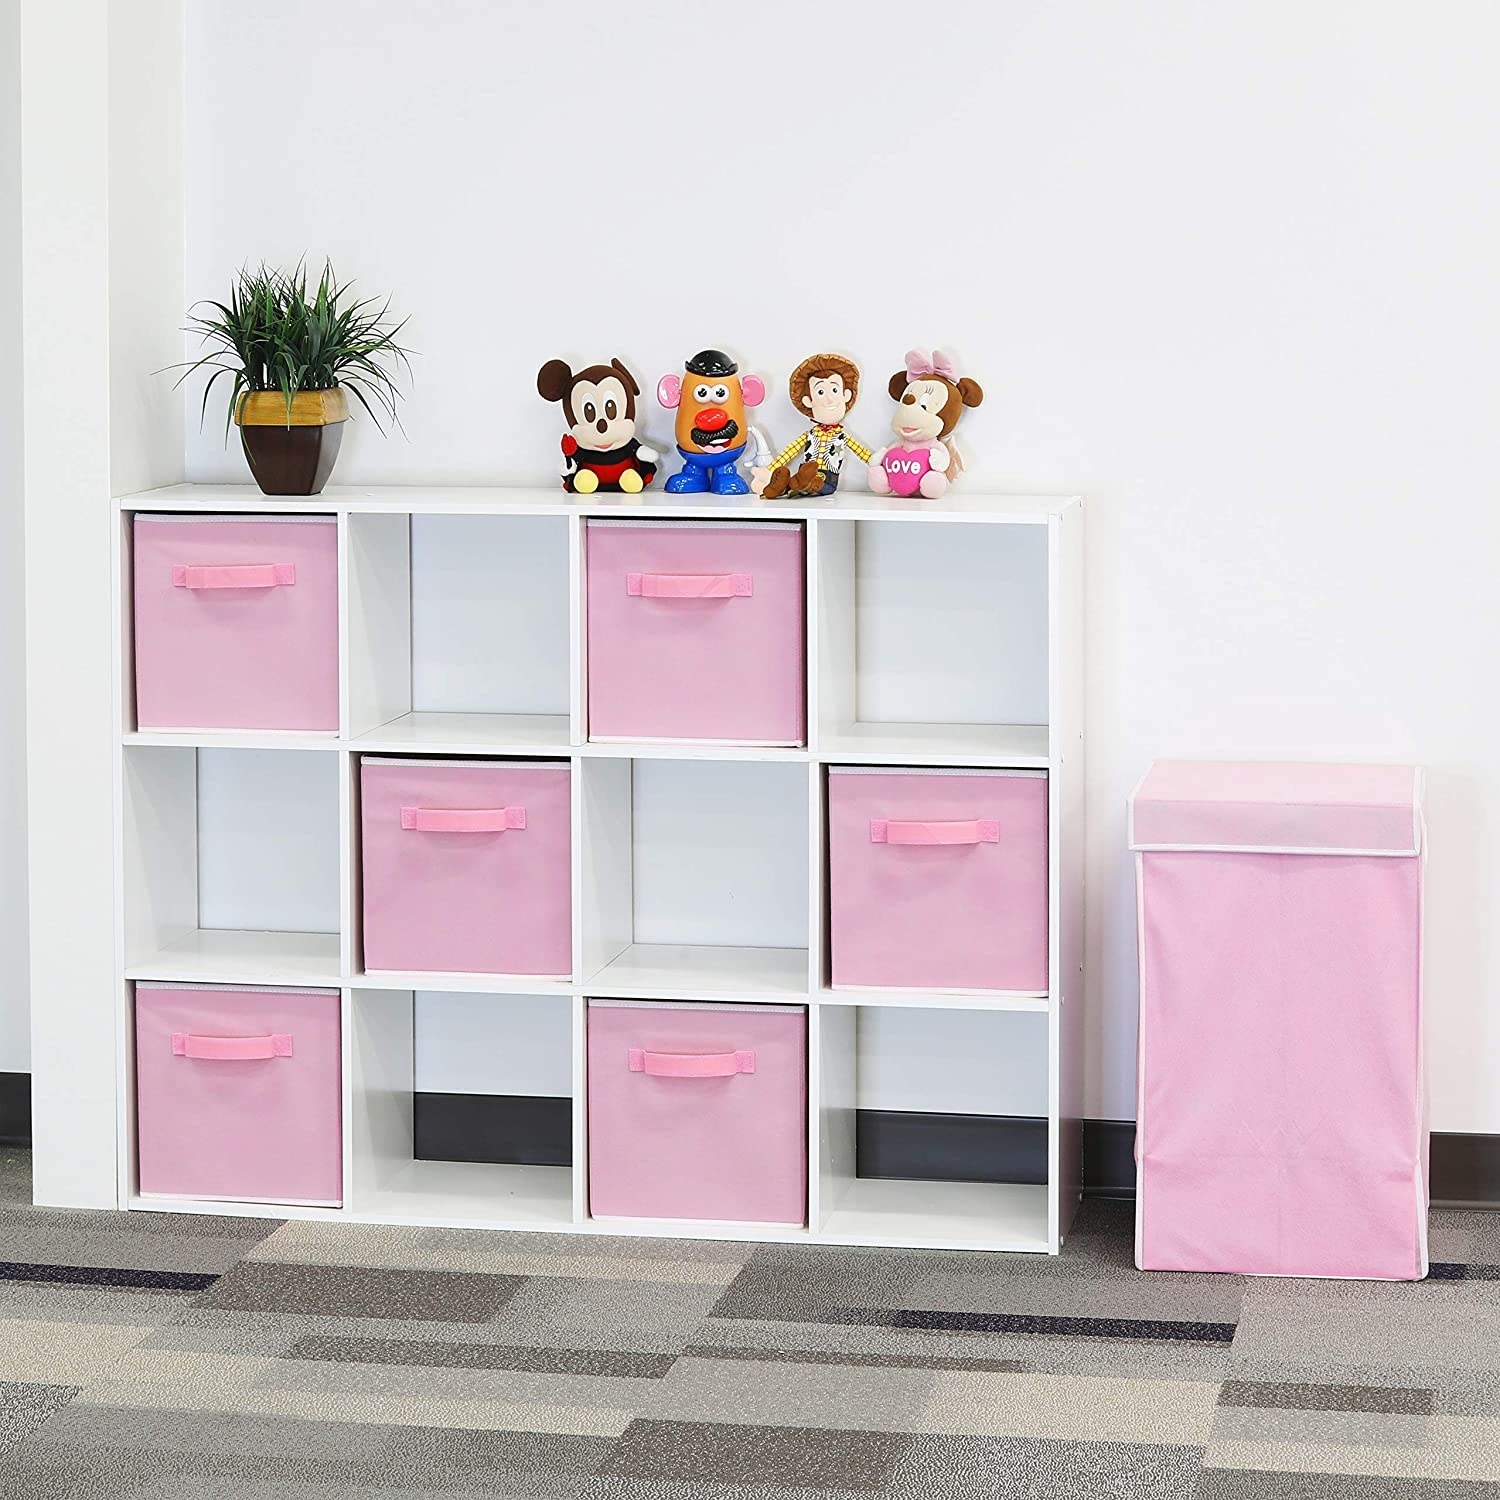 A large bookshelf with cube-shaped compartments, half the cubes have a large fabric storage box on them